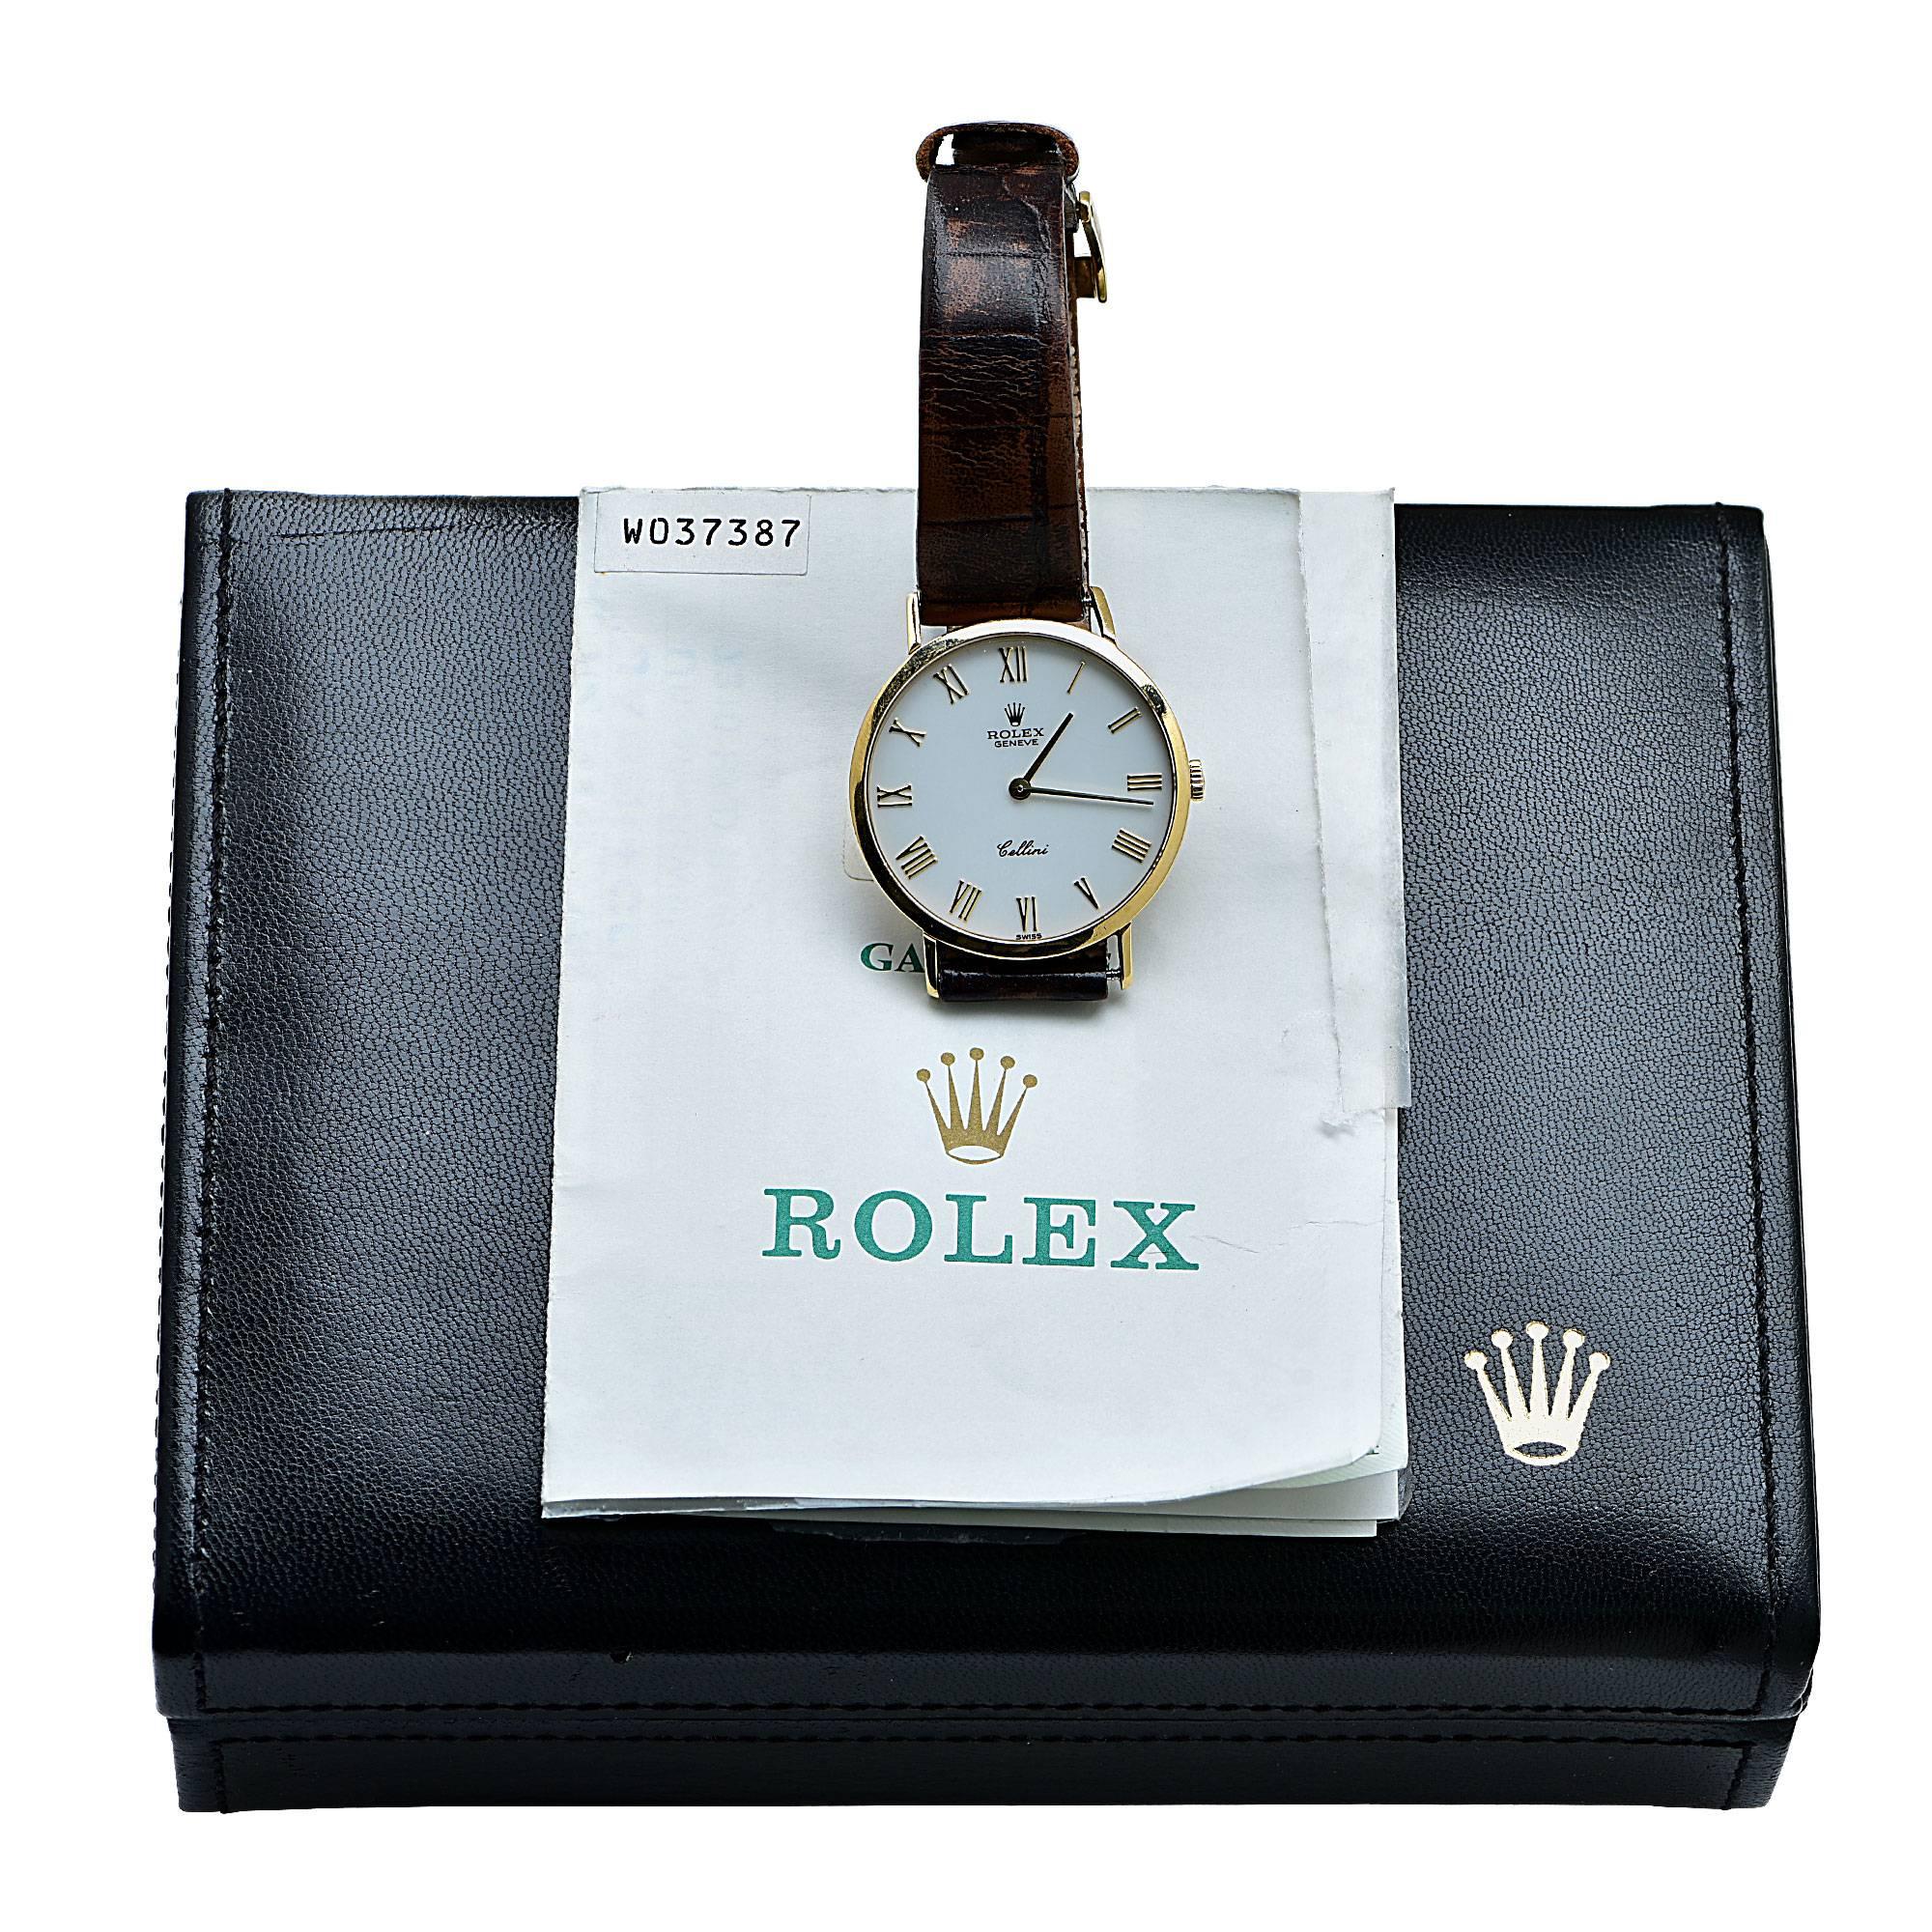 18k yellow gold Rolex Cellini watch with box and papers.

This gold watch is accompanied by a retail appraisal performed by a Graduate Gemologist.